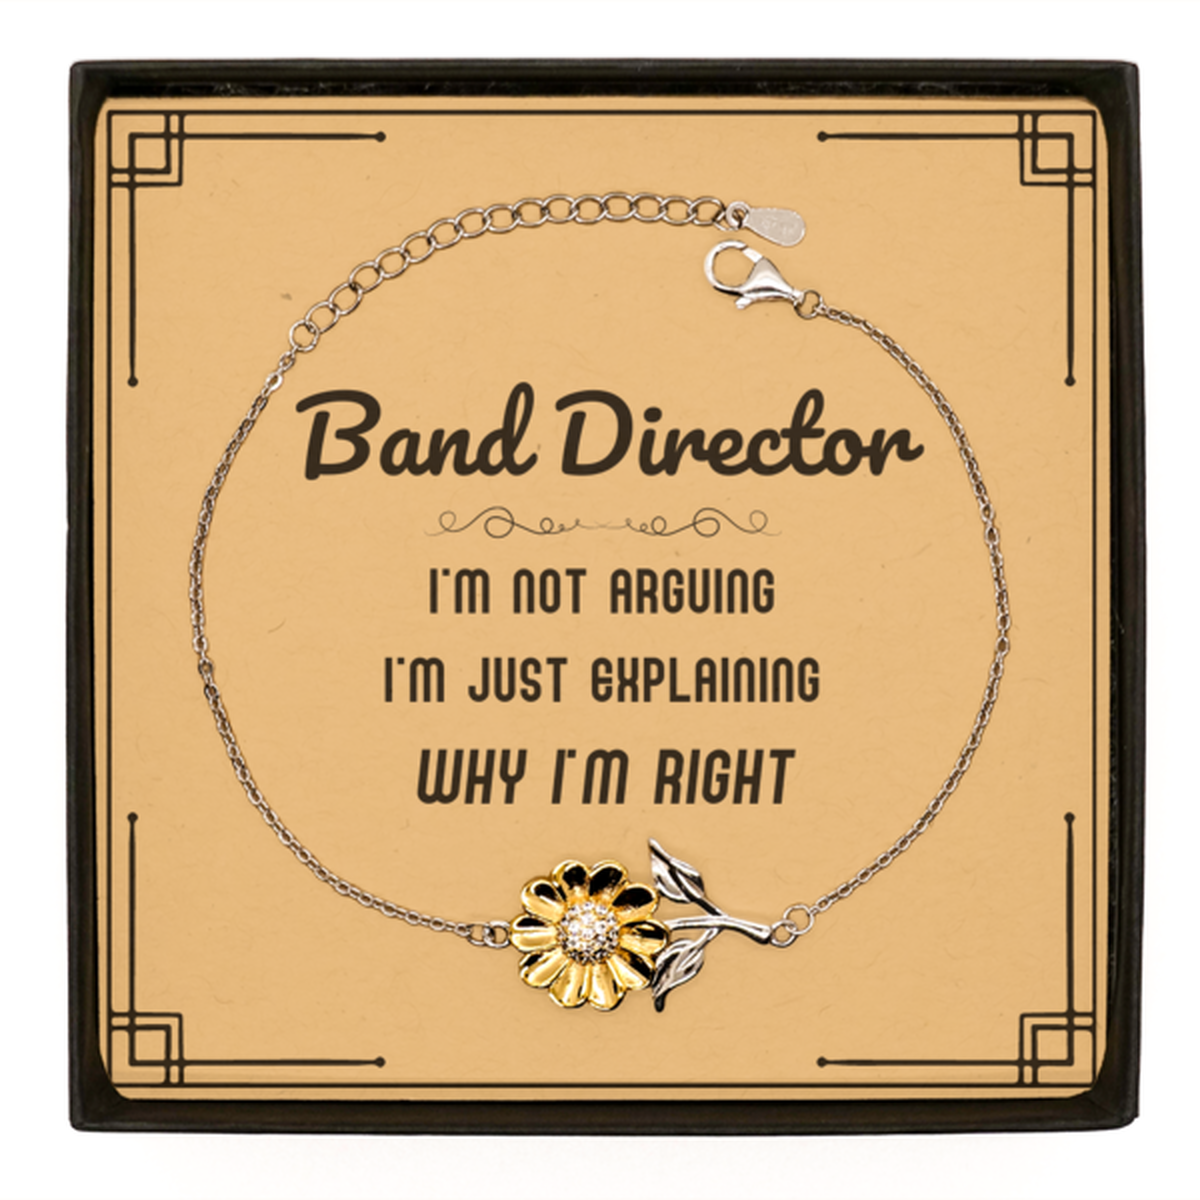 Band Director I'm not Arguing. I'm Just Explaining Why I'm RIGHT Sunflower Bracelet, Funny Saying Quote Band Director Gifts For Band Director Message Card Graduation Birthday Christmas Gifts for Men Women Coworker